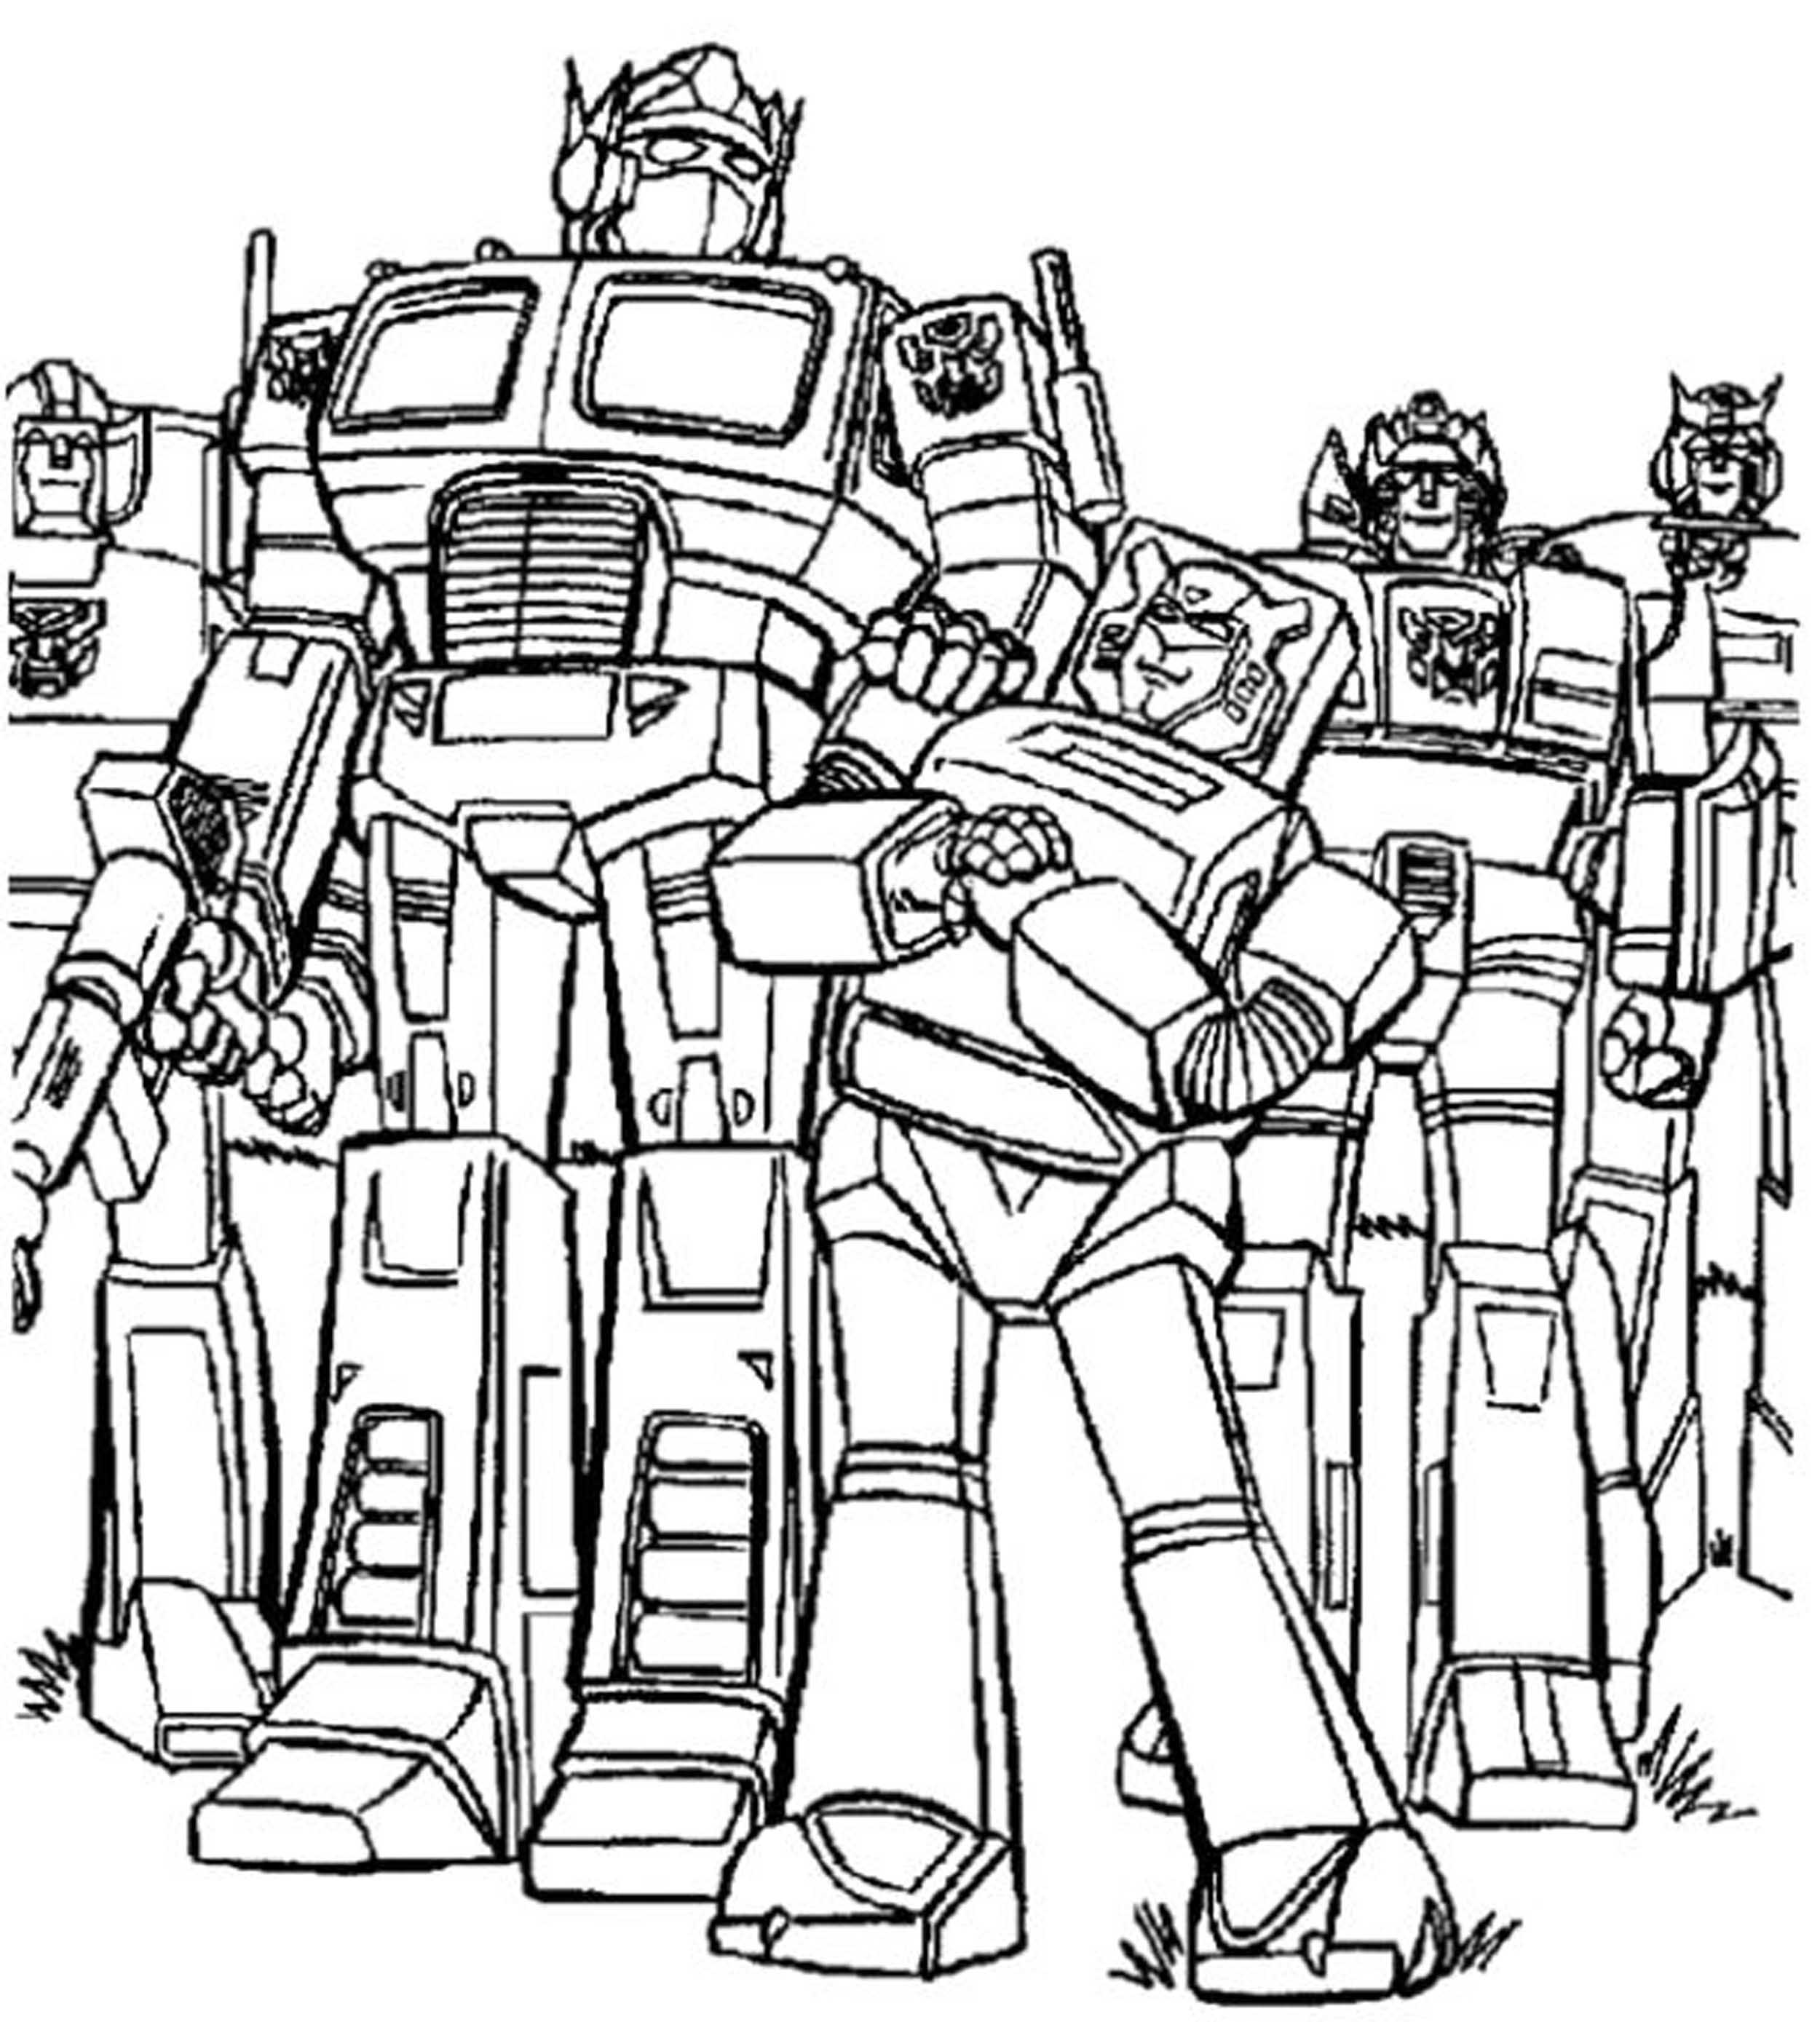 Print Download Inviting Kids to Do the Transformers